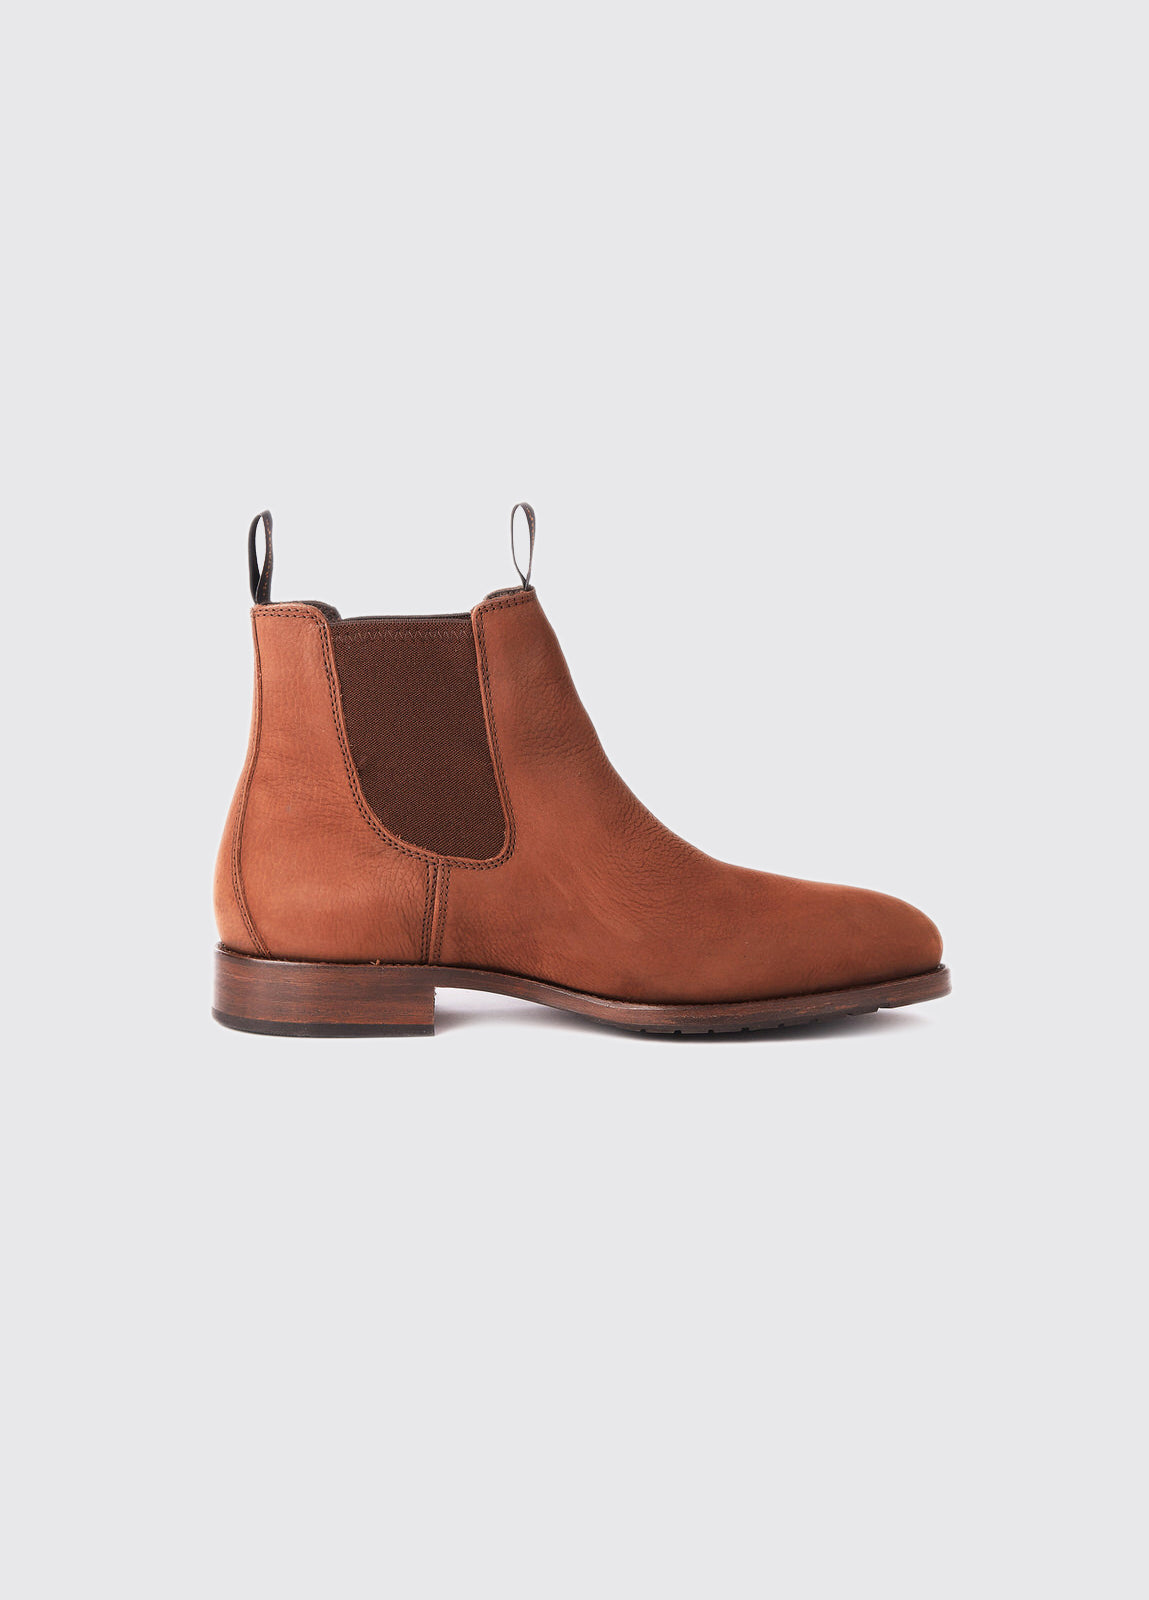 Kerry Leather Soled Boot - Walnut